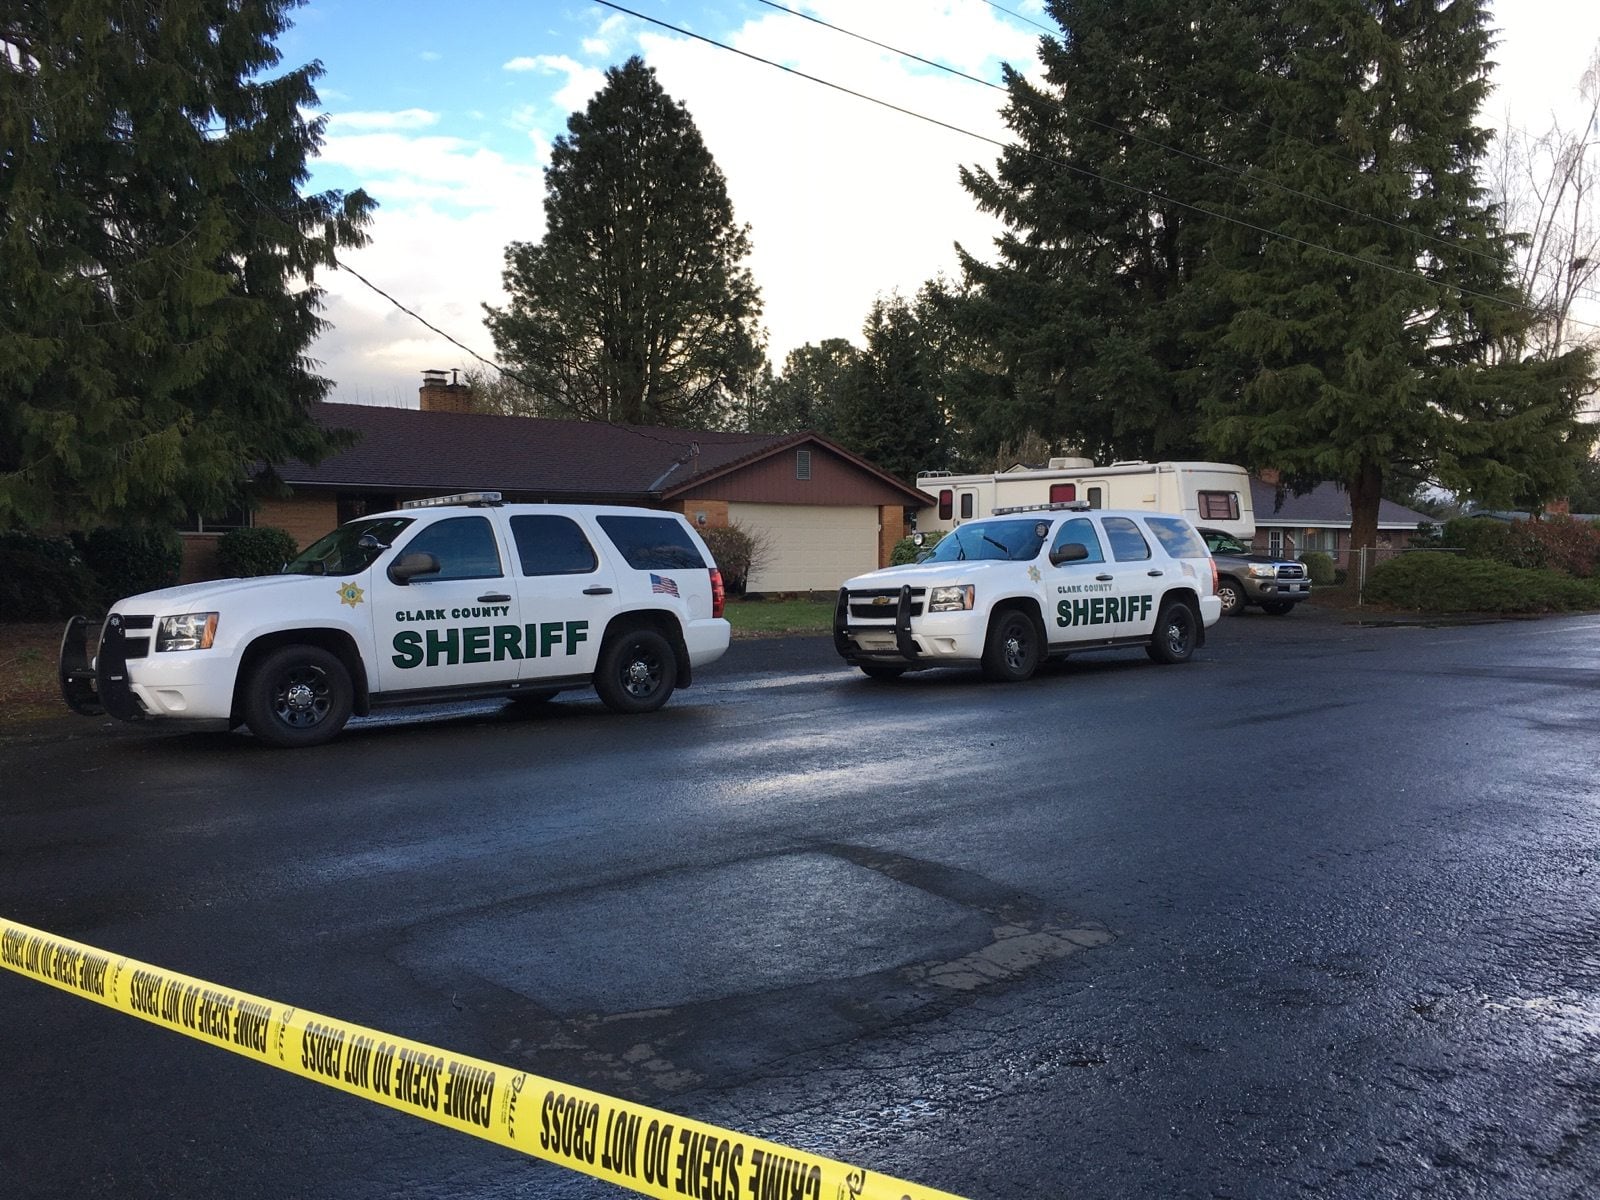 Deputies from the Clark County Sheriff's Office fired on a woman who attacked them with a hammer and a knife today in the Five Corners area, according to police. The woman died at the scene.